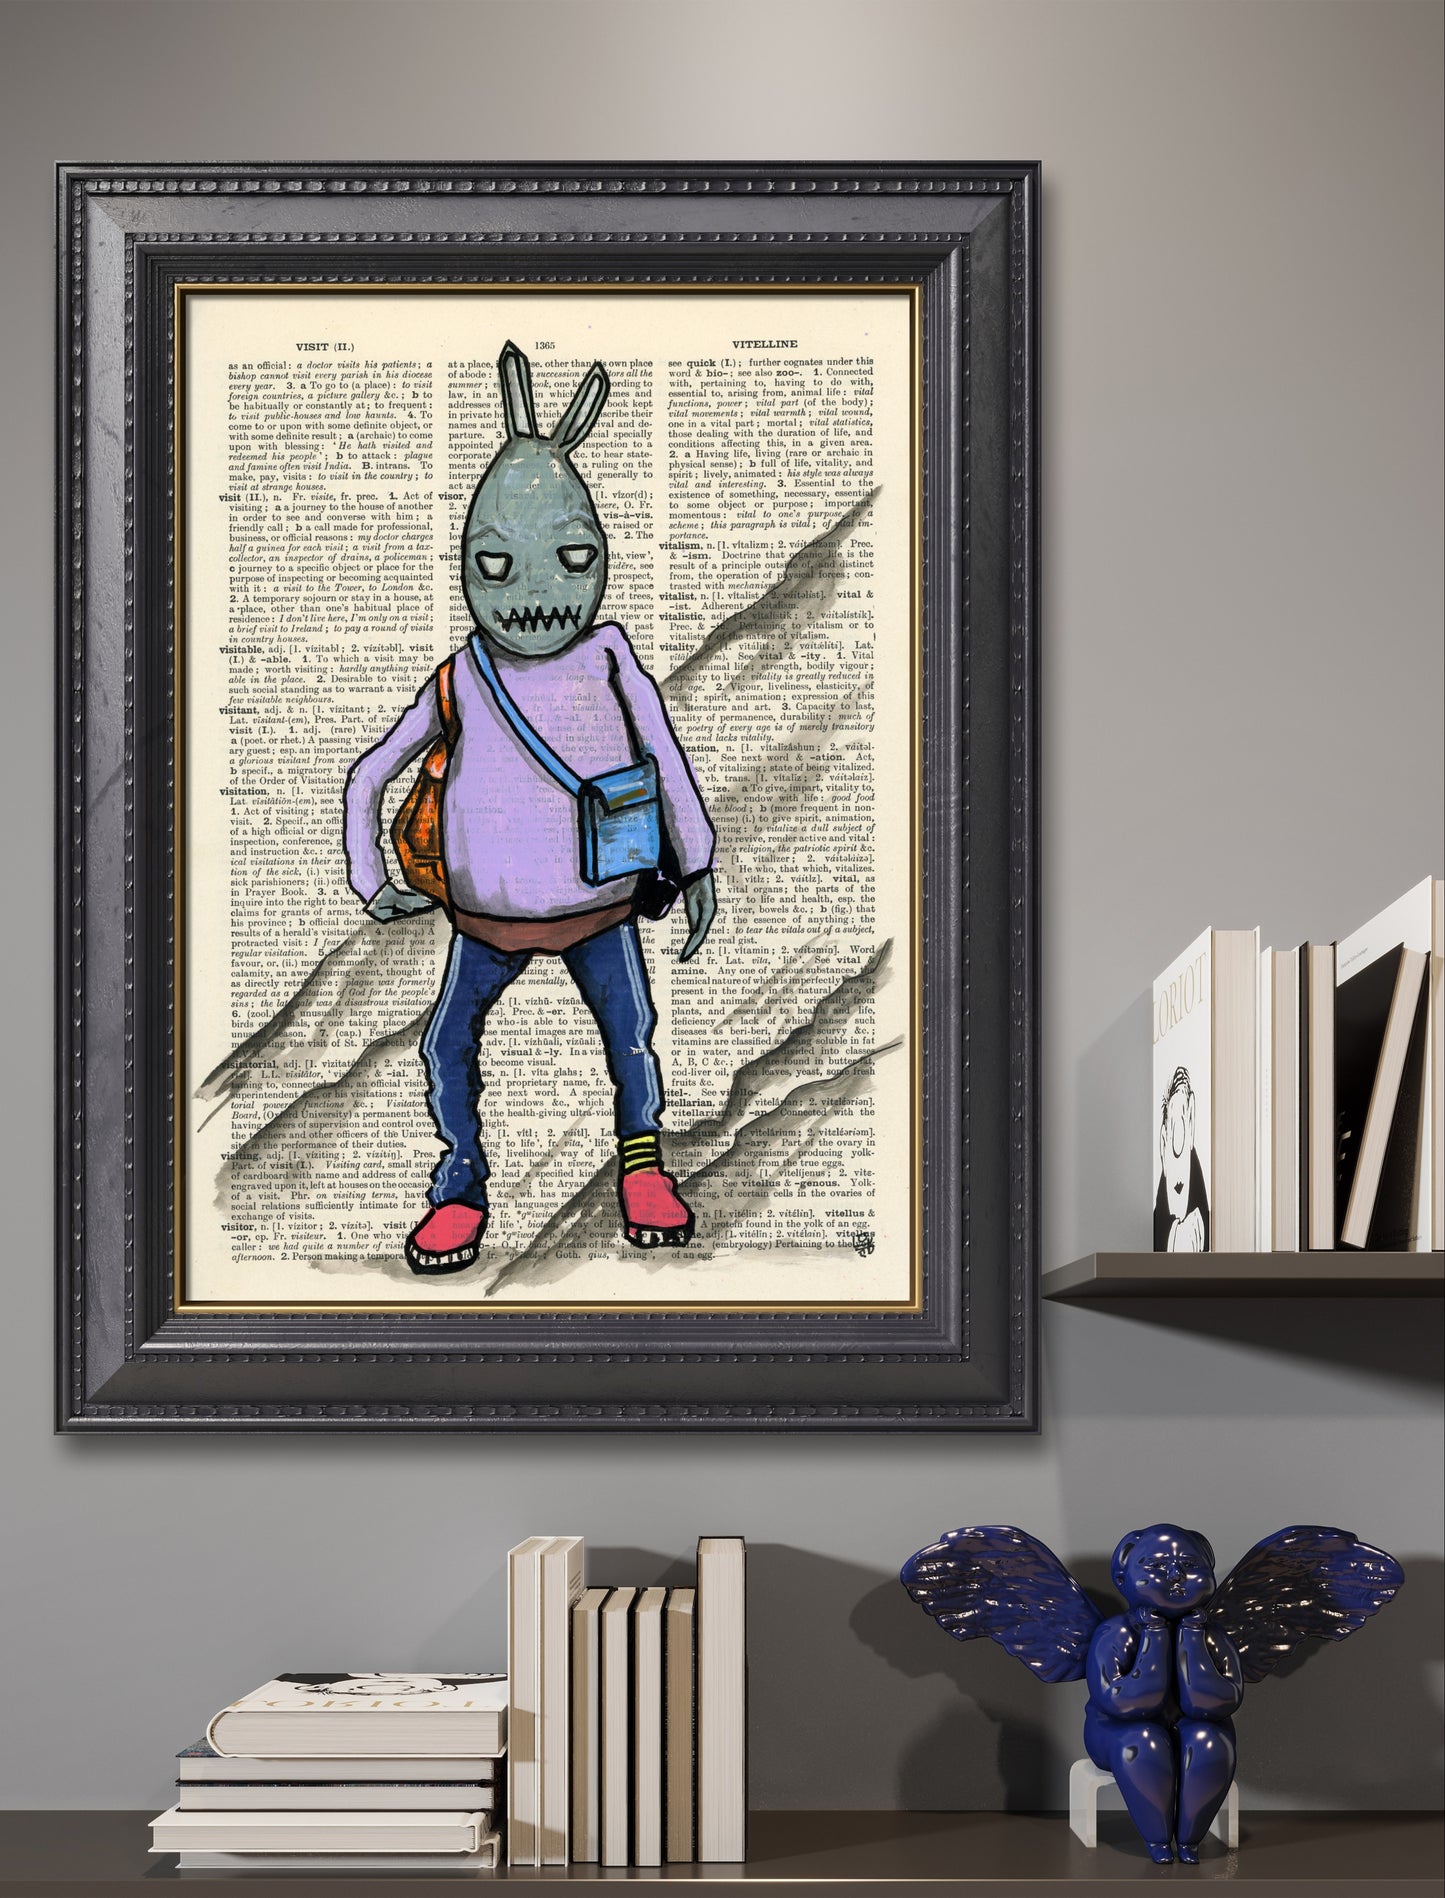 Artistic Depiction of Tracksuit Bunny